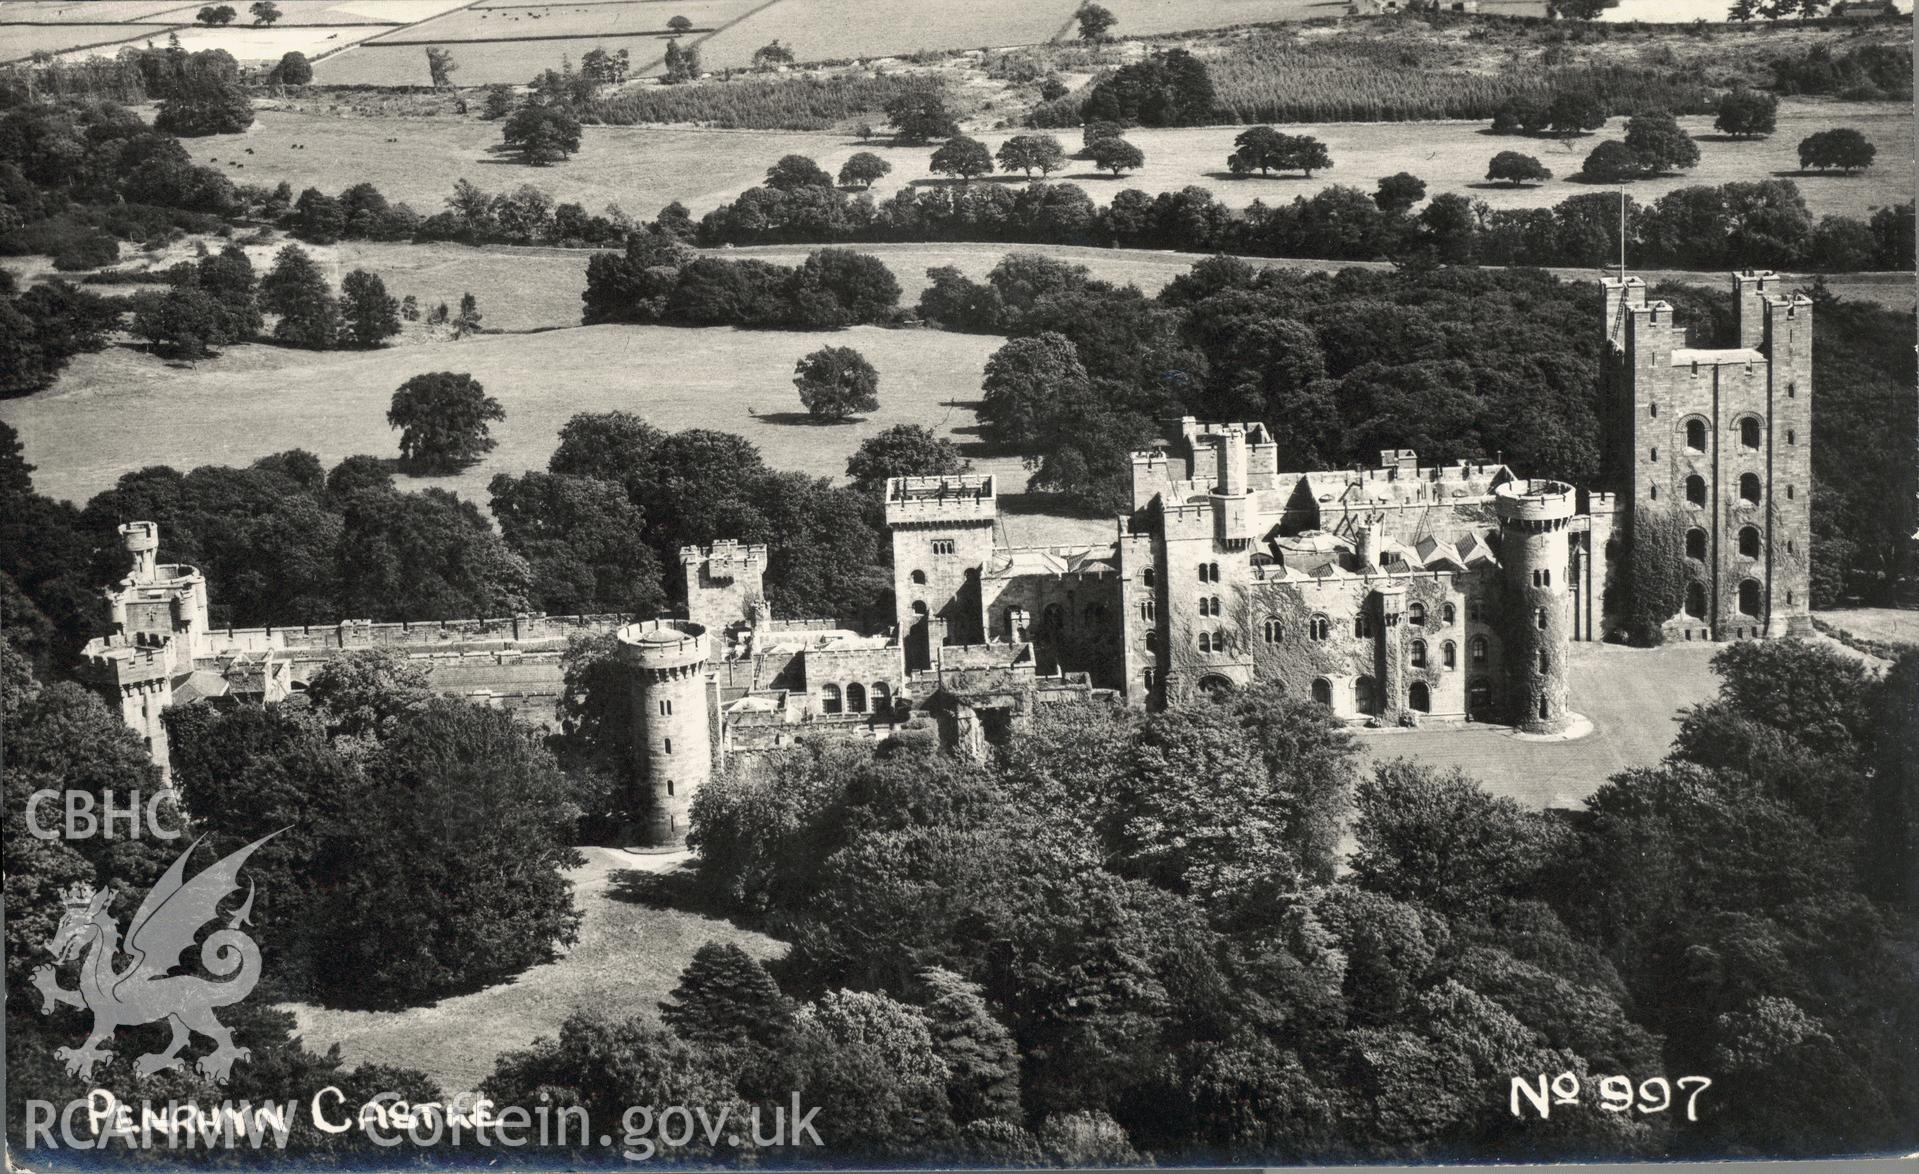 Digitised postcard image of aerial photo of Penrhyn Castle, Bangor, Photair Ltd., Barton Airport, Manchester. Produced by Parks and Gardens Data Services, from an original item in the Peter Davis Collection at Parks and Gardens UK. We hold only web-resolution images of this collection, suitable for viewing on screen and for research purposes only. We do not hold the original images, or publication quality scans.